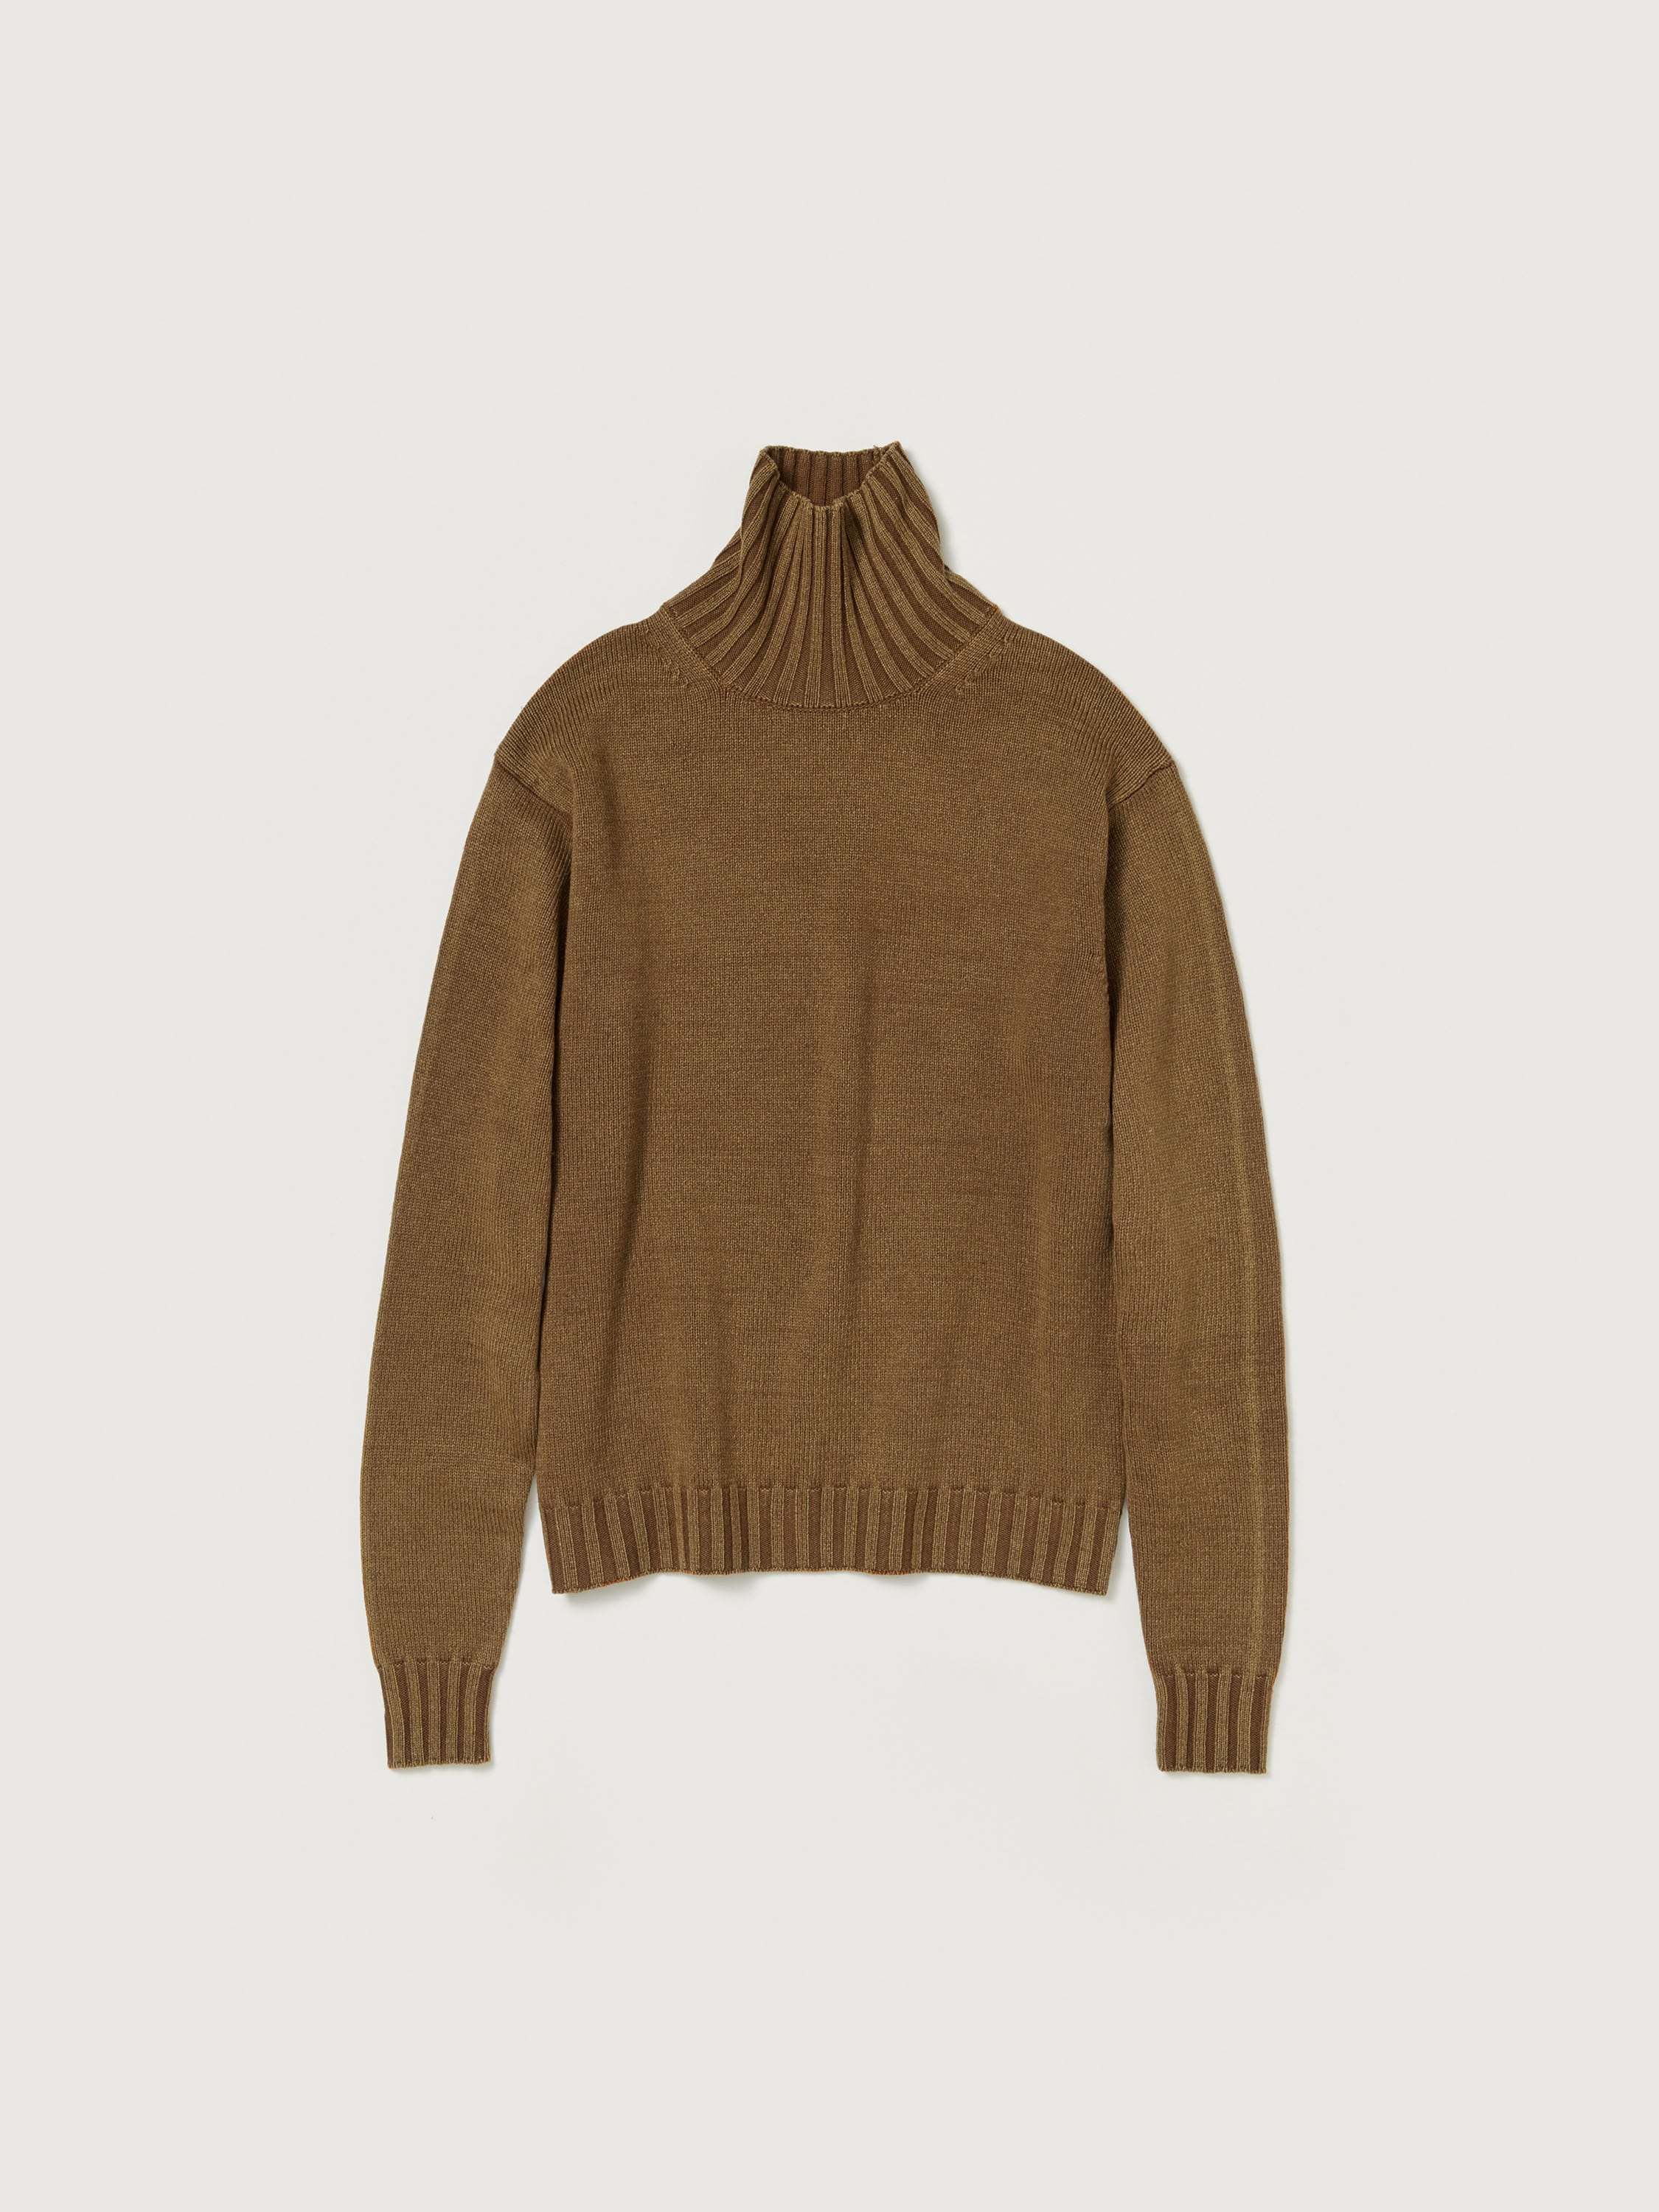 WASHED FRENCH MERINO KNIT TURTLE - AURALEE Official Website